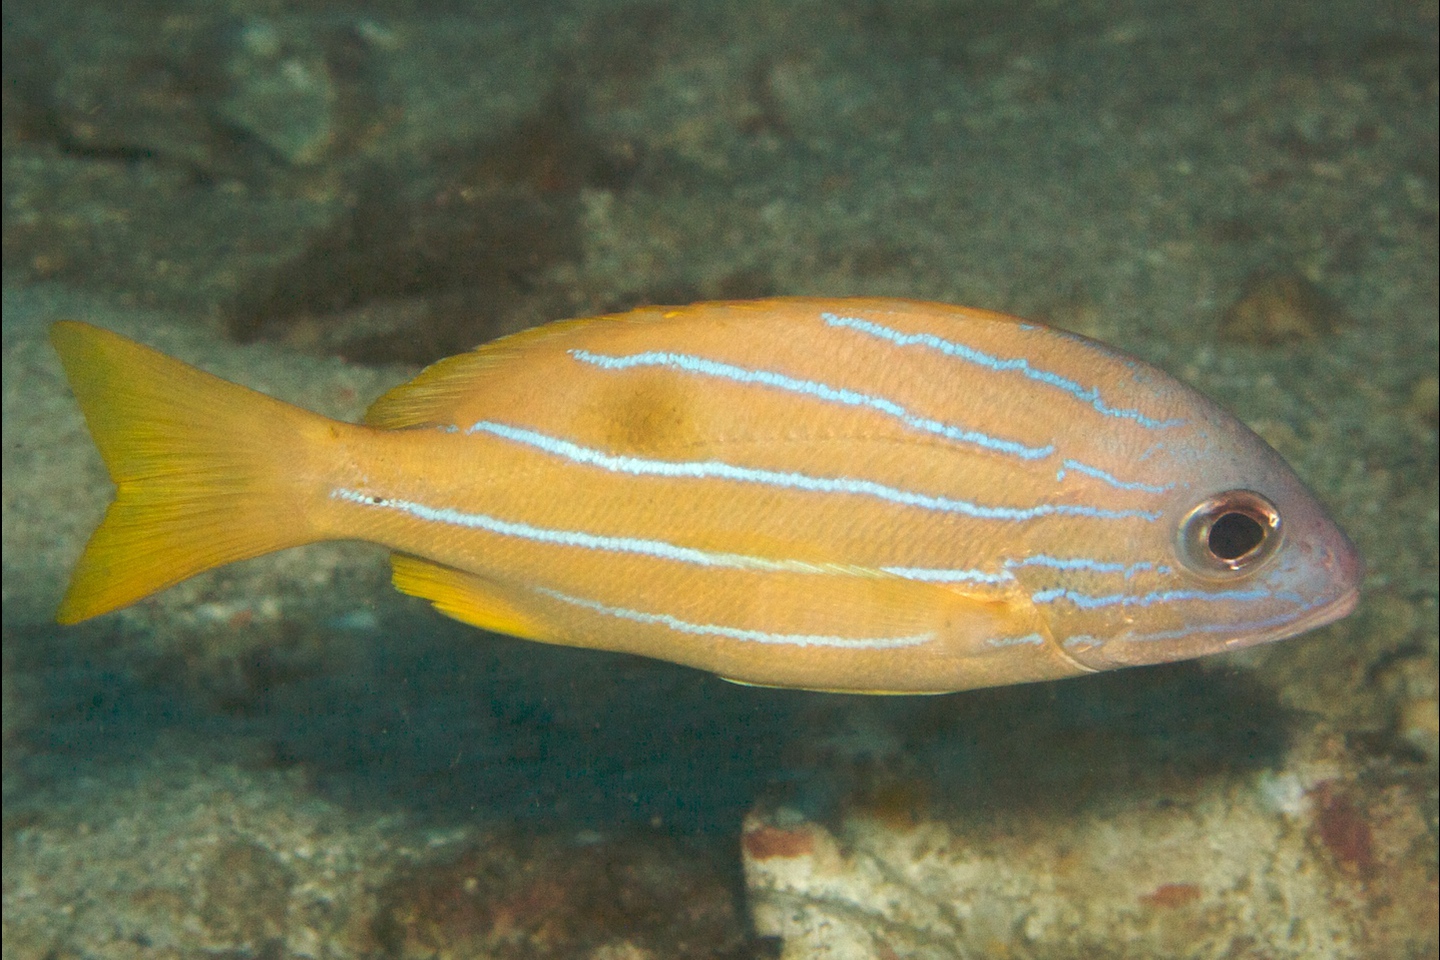 Five-lined snapper